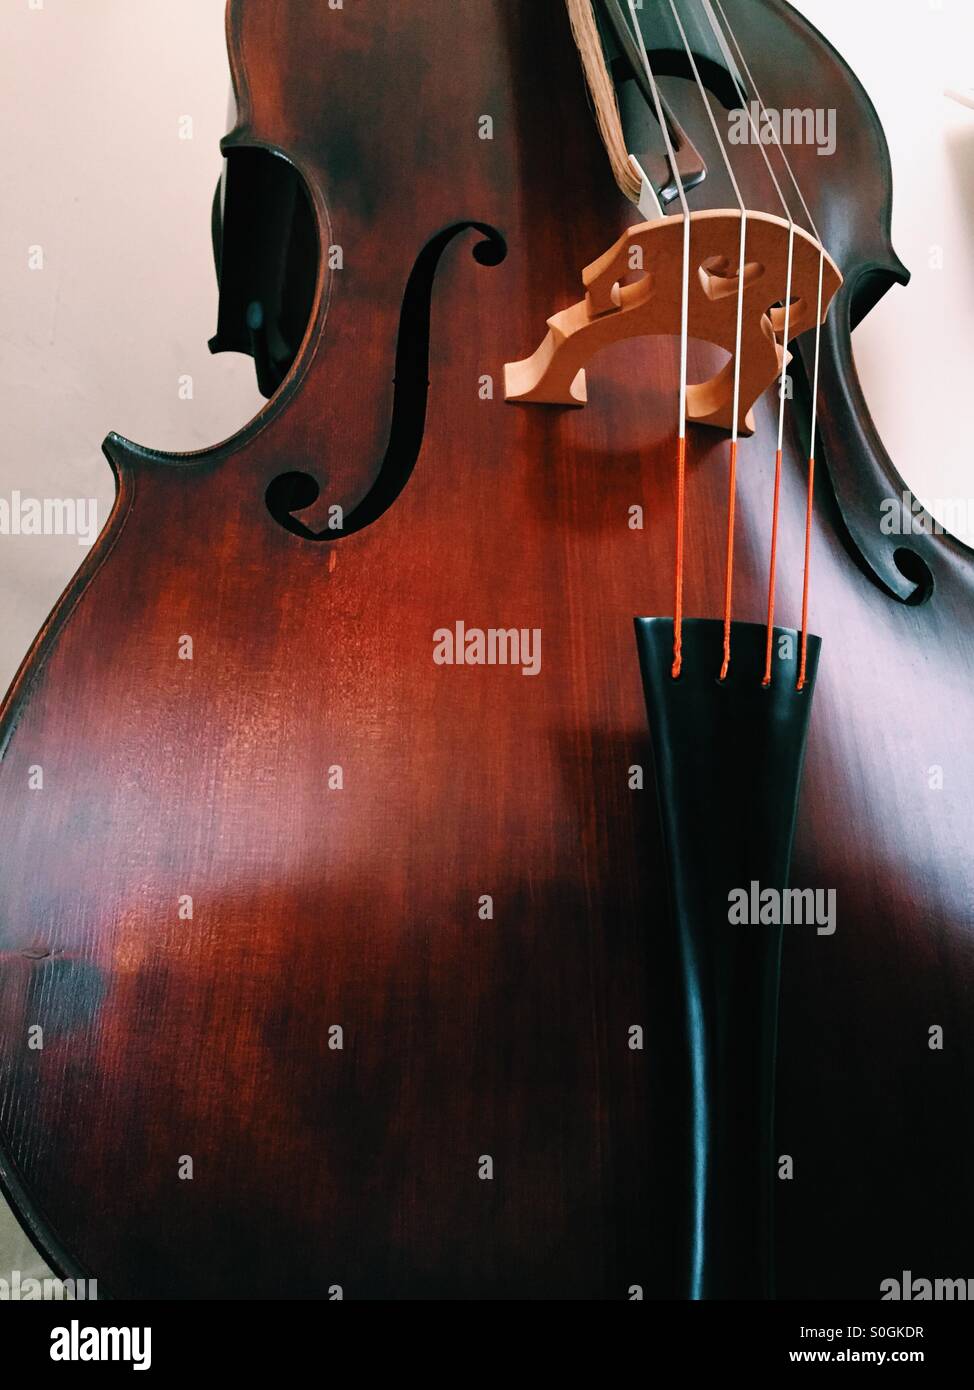 Double bass instrument standing tall Stock Photo